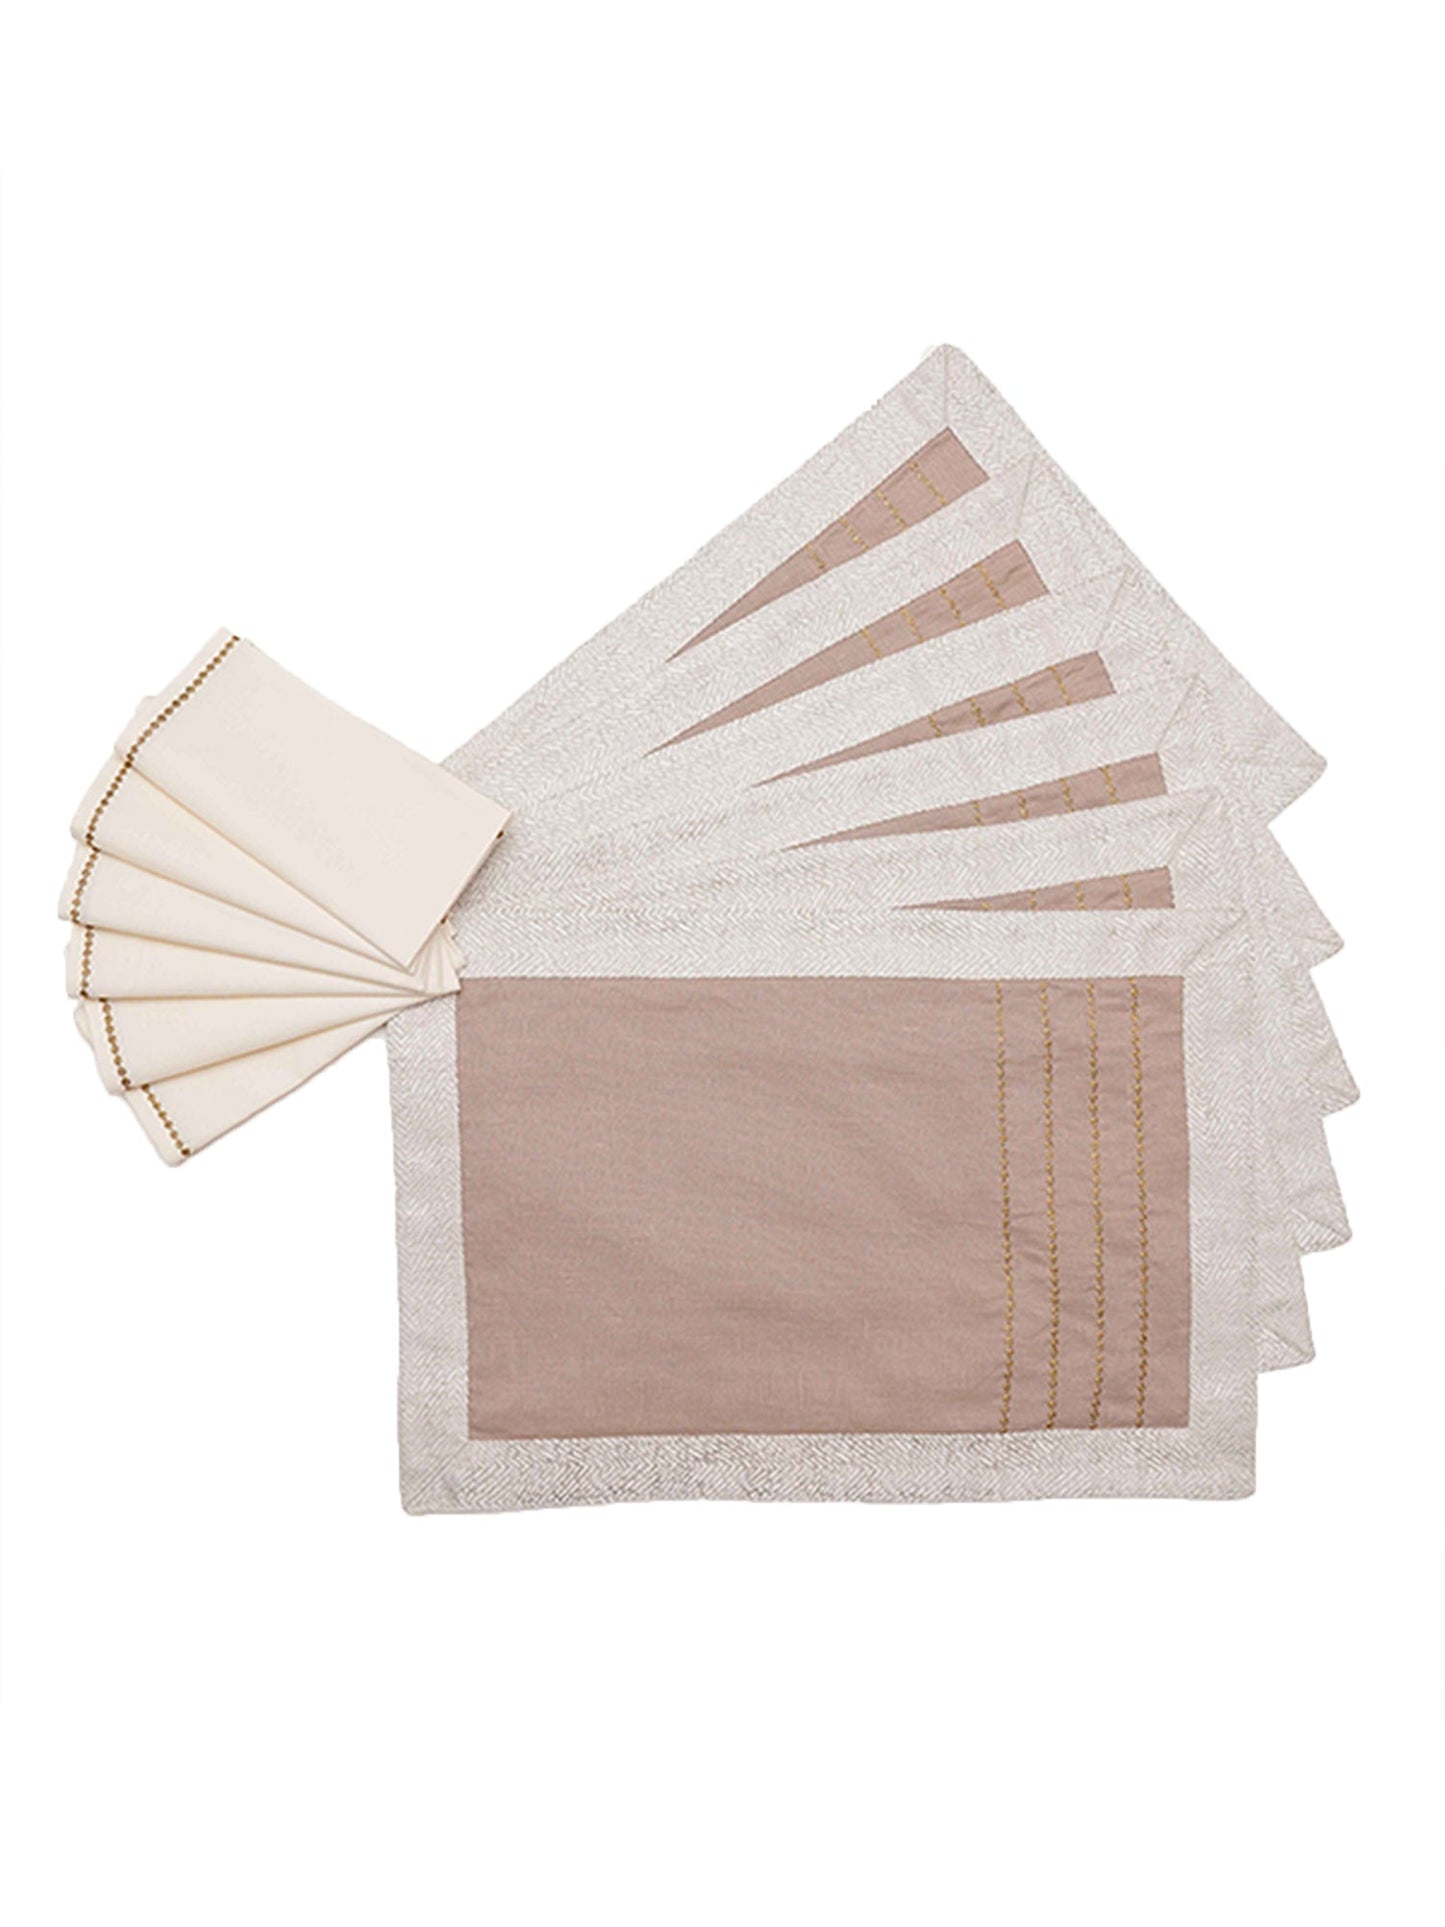 Table Mats and Napkins  Cotton and Polyester Embroidered Table Beige and Off-White - 13" x 19" ; 16" x 16" - Set of 6